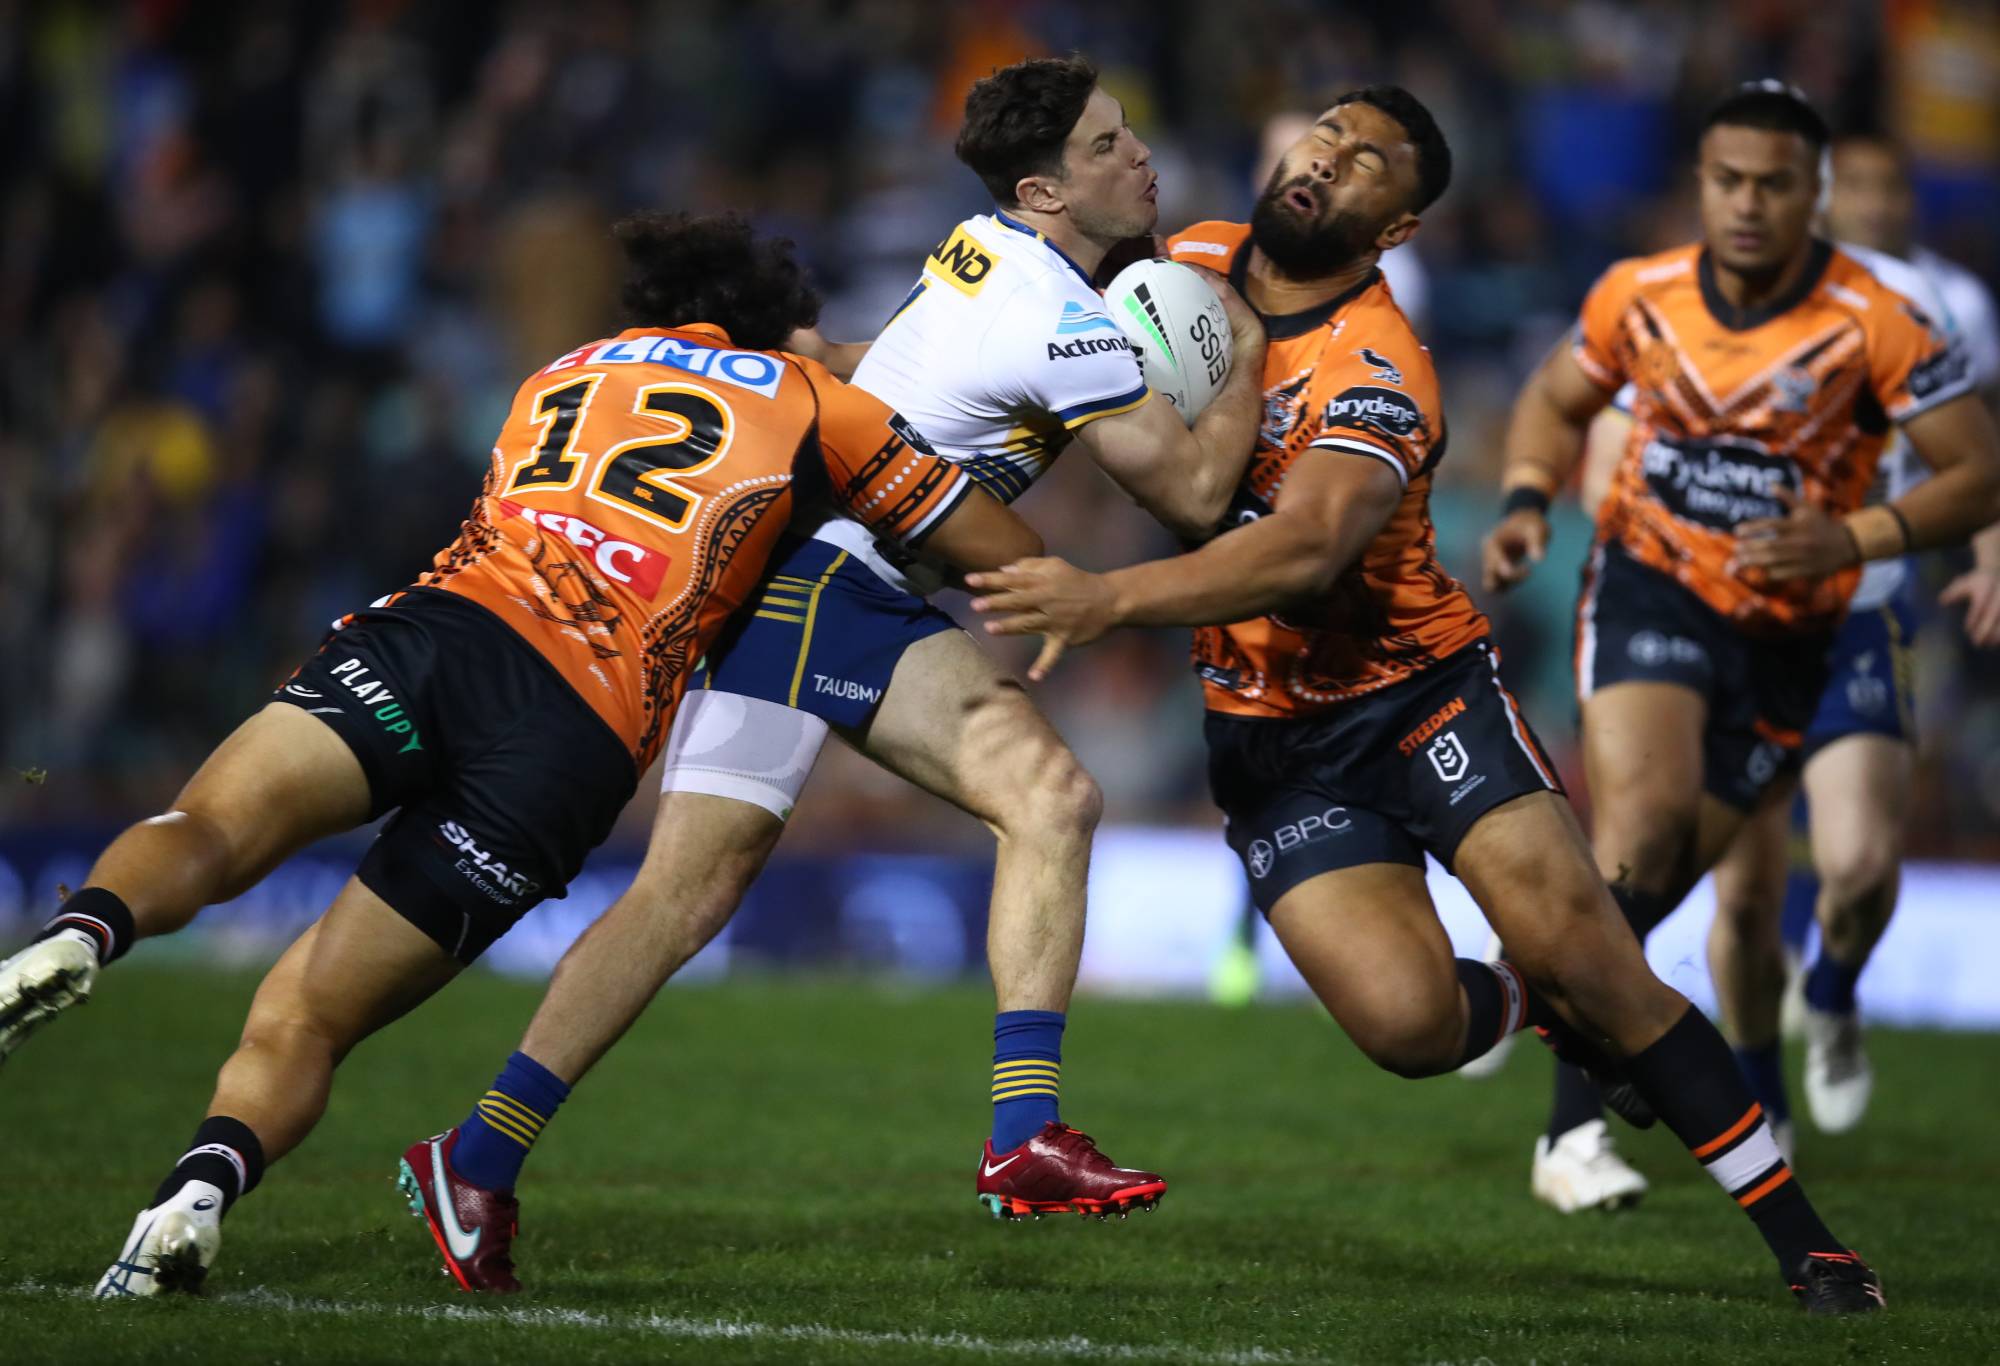 SYDNEY, AUSTRALIA - JULY 09: Mitchell Moses of the Eels/tb Zane Musgrove of the Tigers during the round 17 NRL match between the Wests Tigers and the Parramatta Eels at Leichhardt Oval on July 09, 2022 in Sydney, Australia. (Photo by Jason McCawley/Getty Images)